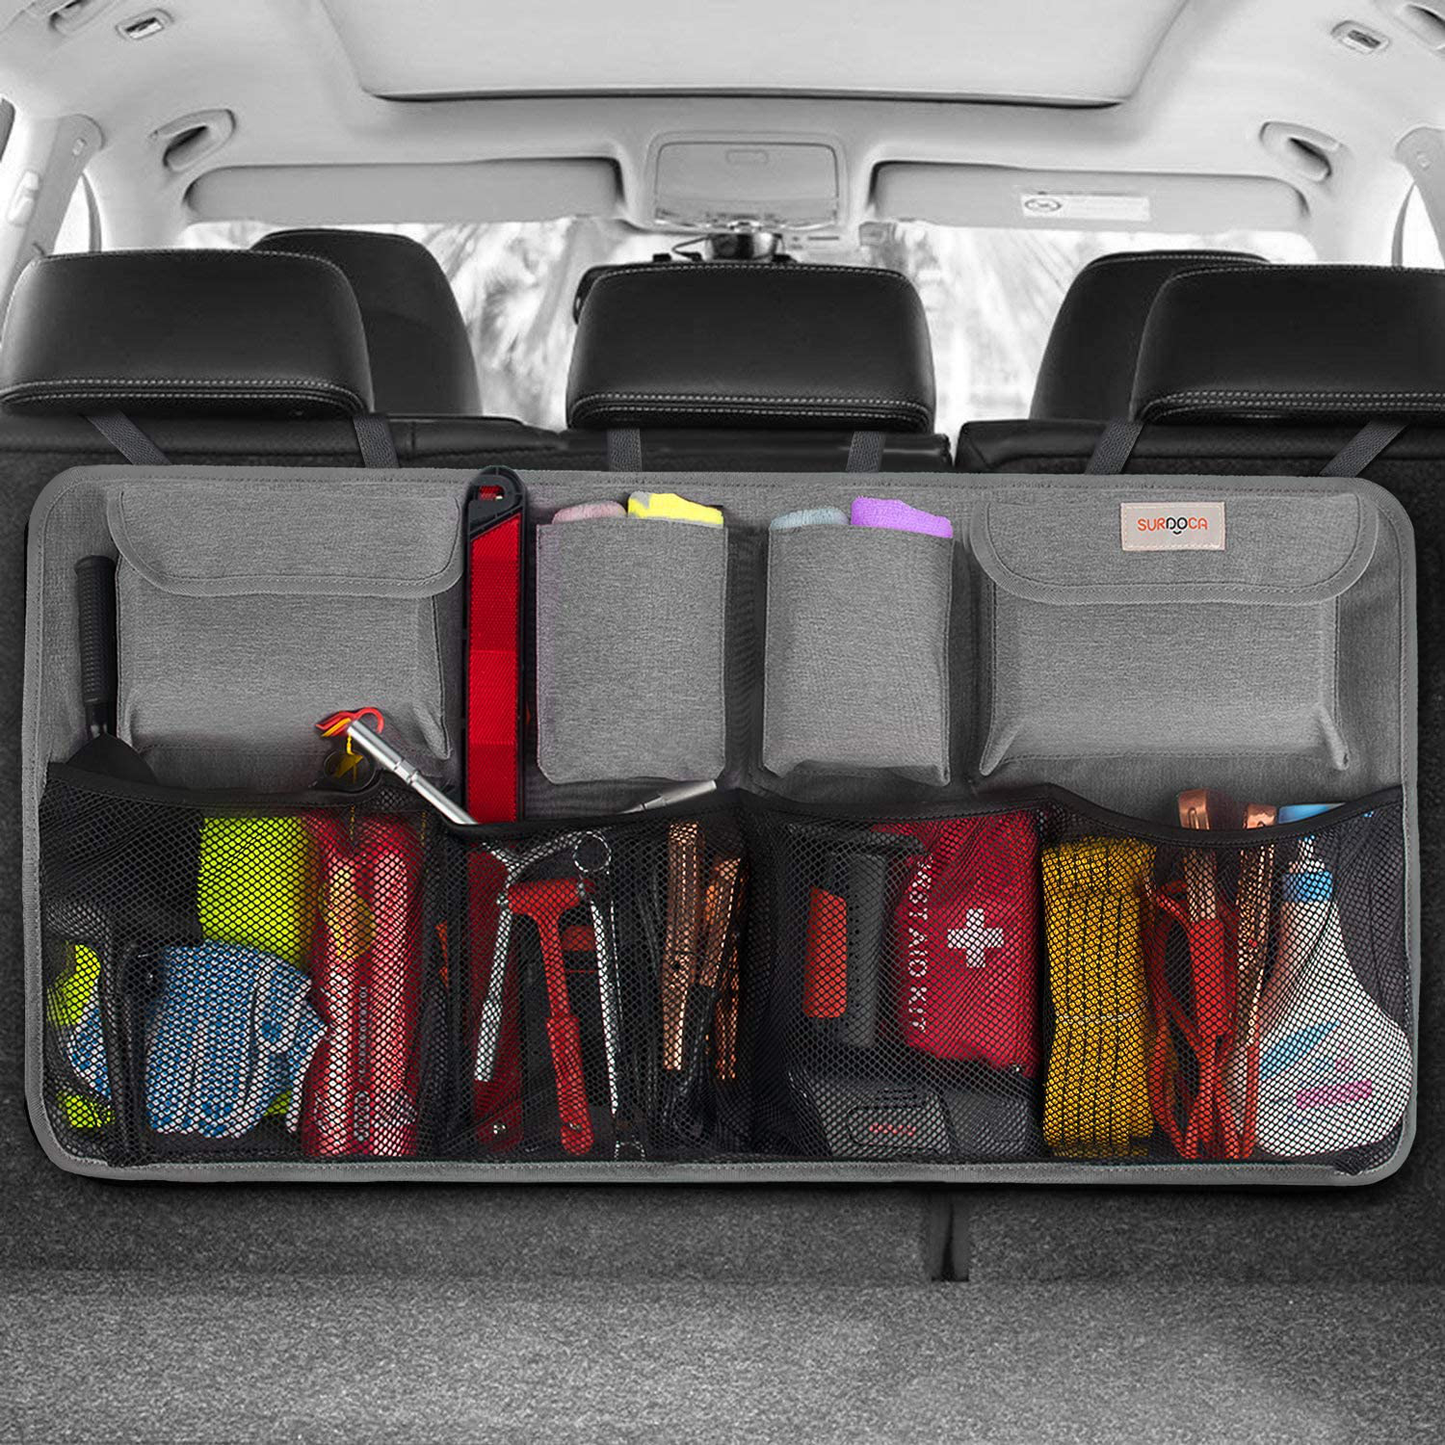 SURDOCA Car Trunk Organizer, 3Rd Gen [7 Times Upgrade] Super Capacity Car Organizer, Equipped with [Robust Elastic Net & 3 Magic Stick] Car Trunk Tidy Storage Bag with Lids, Space Saving Expert